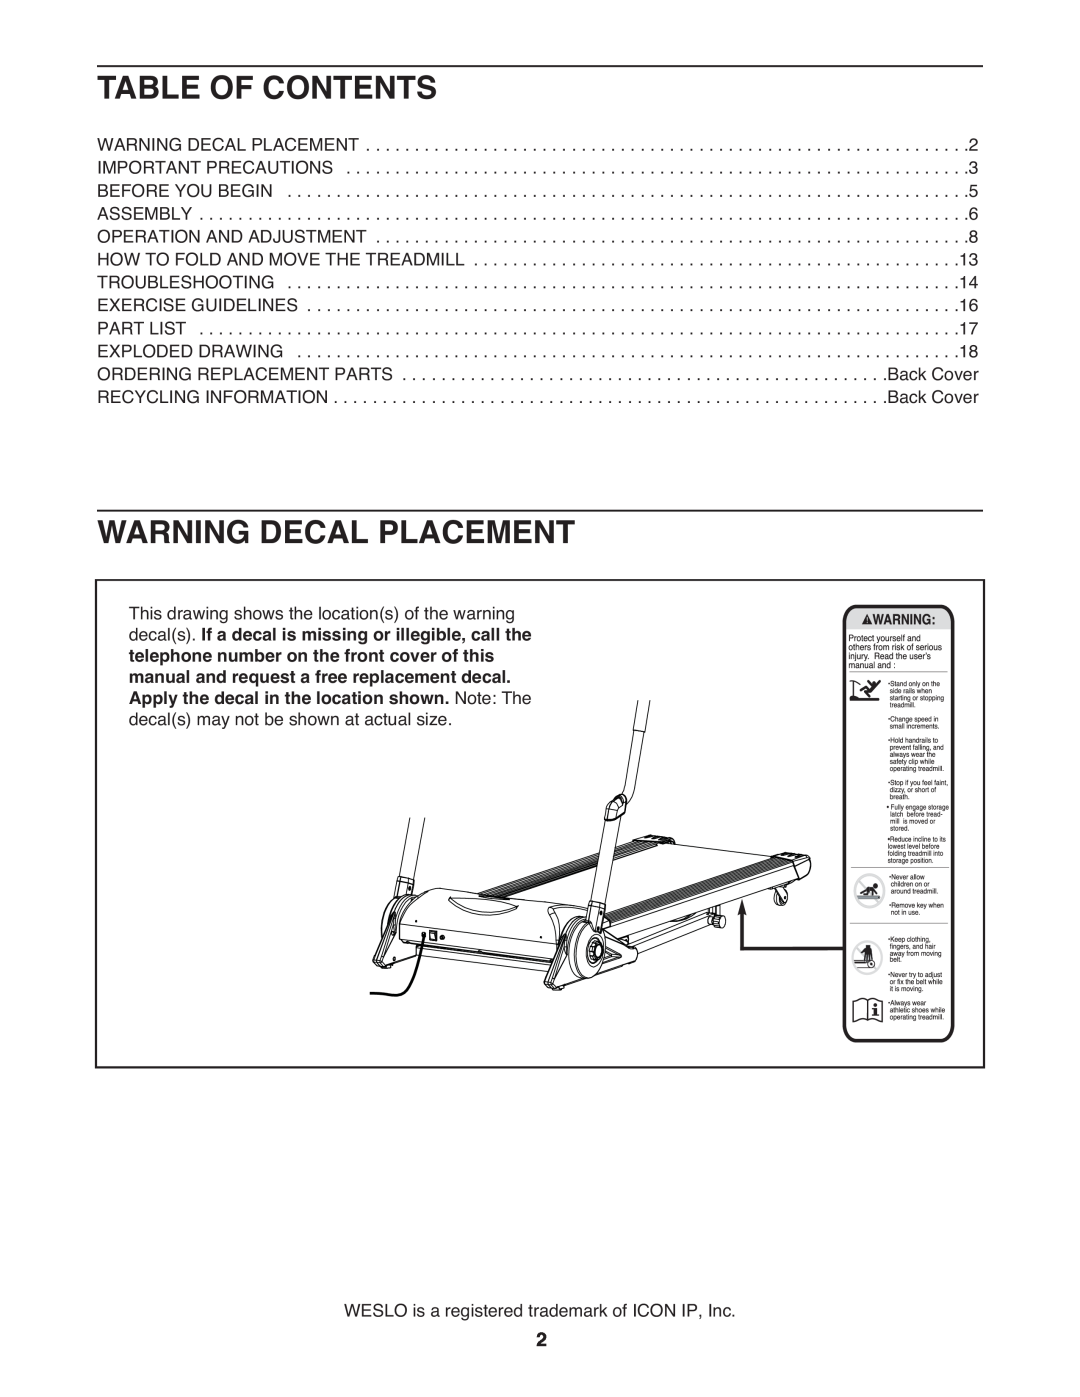 Weslo WETL34709.0 user manual Table Of Contents, Warning Decal Placement, WESLO is a registered trademark of ICON IP, Inc 